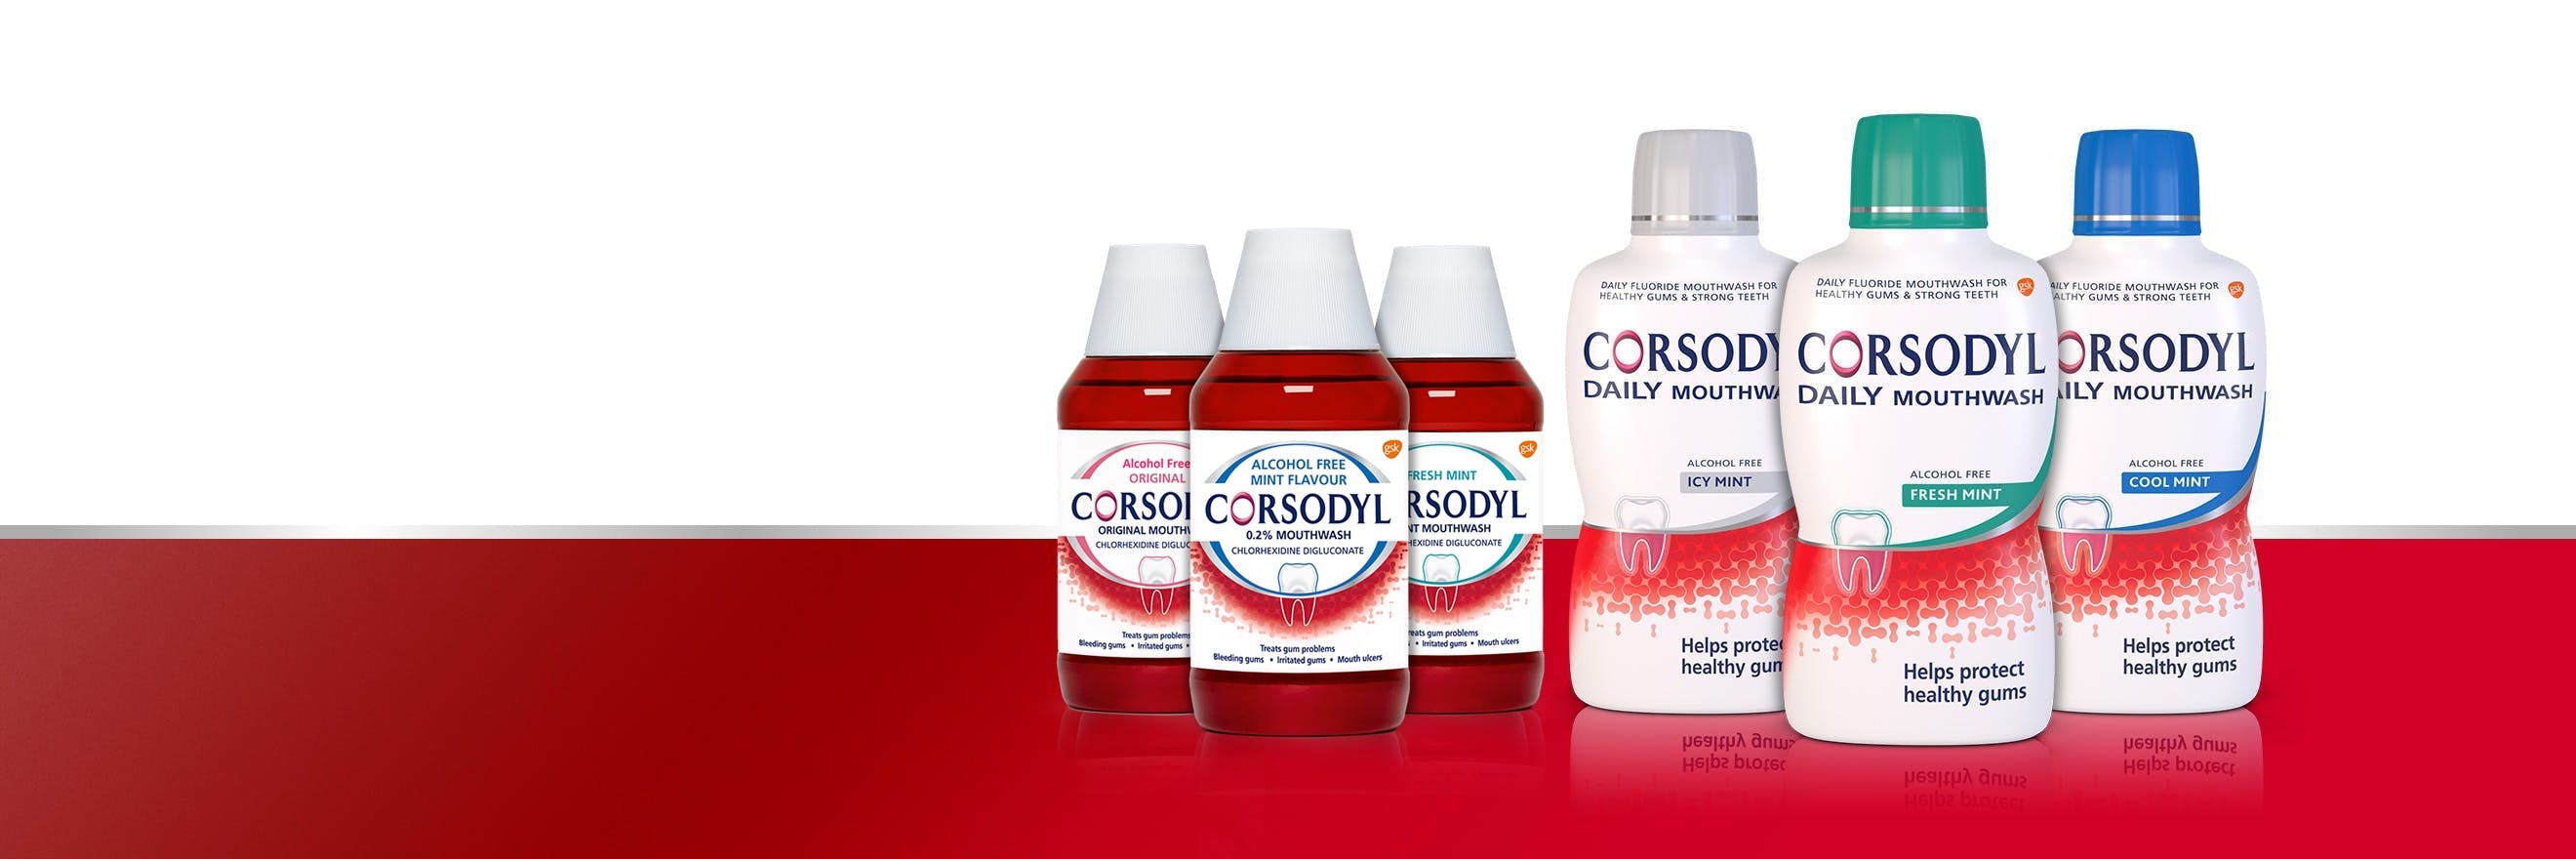 Six bottles of Corsodyl mouthwash and Corsodyl Daily Mouthwash, including original, alcohol free, and mint